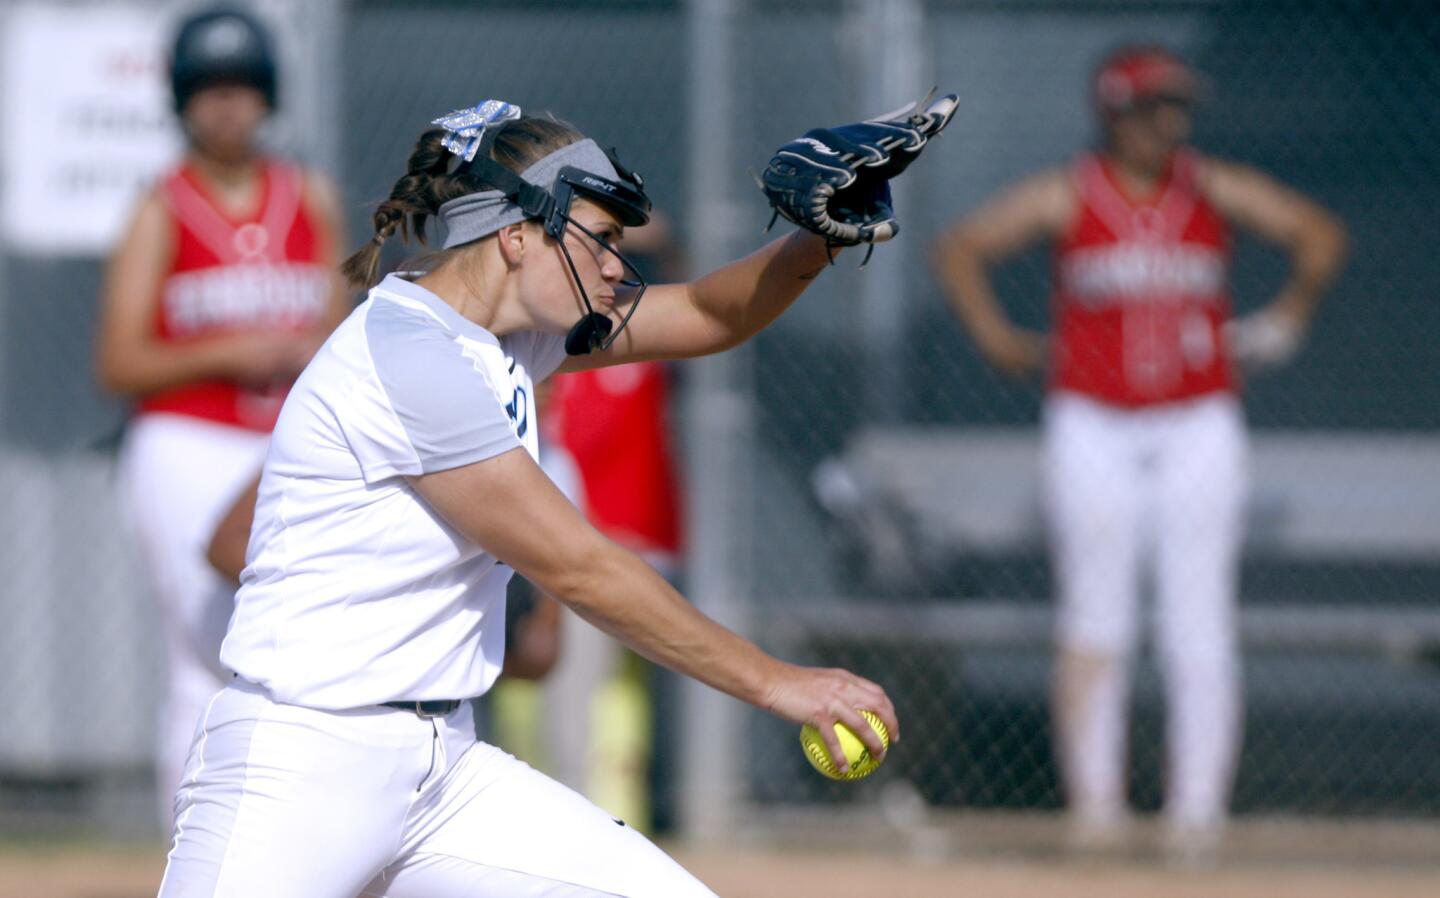 Photo Gallery: Burroughs High School softball breaks game wide open vs. Crescenta Valley High School at top of fifth inning